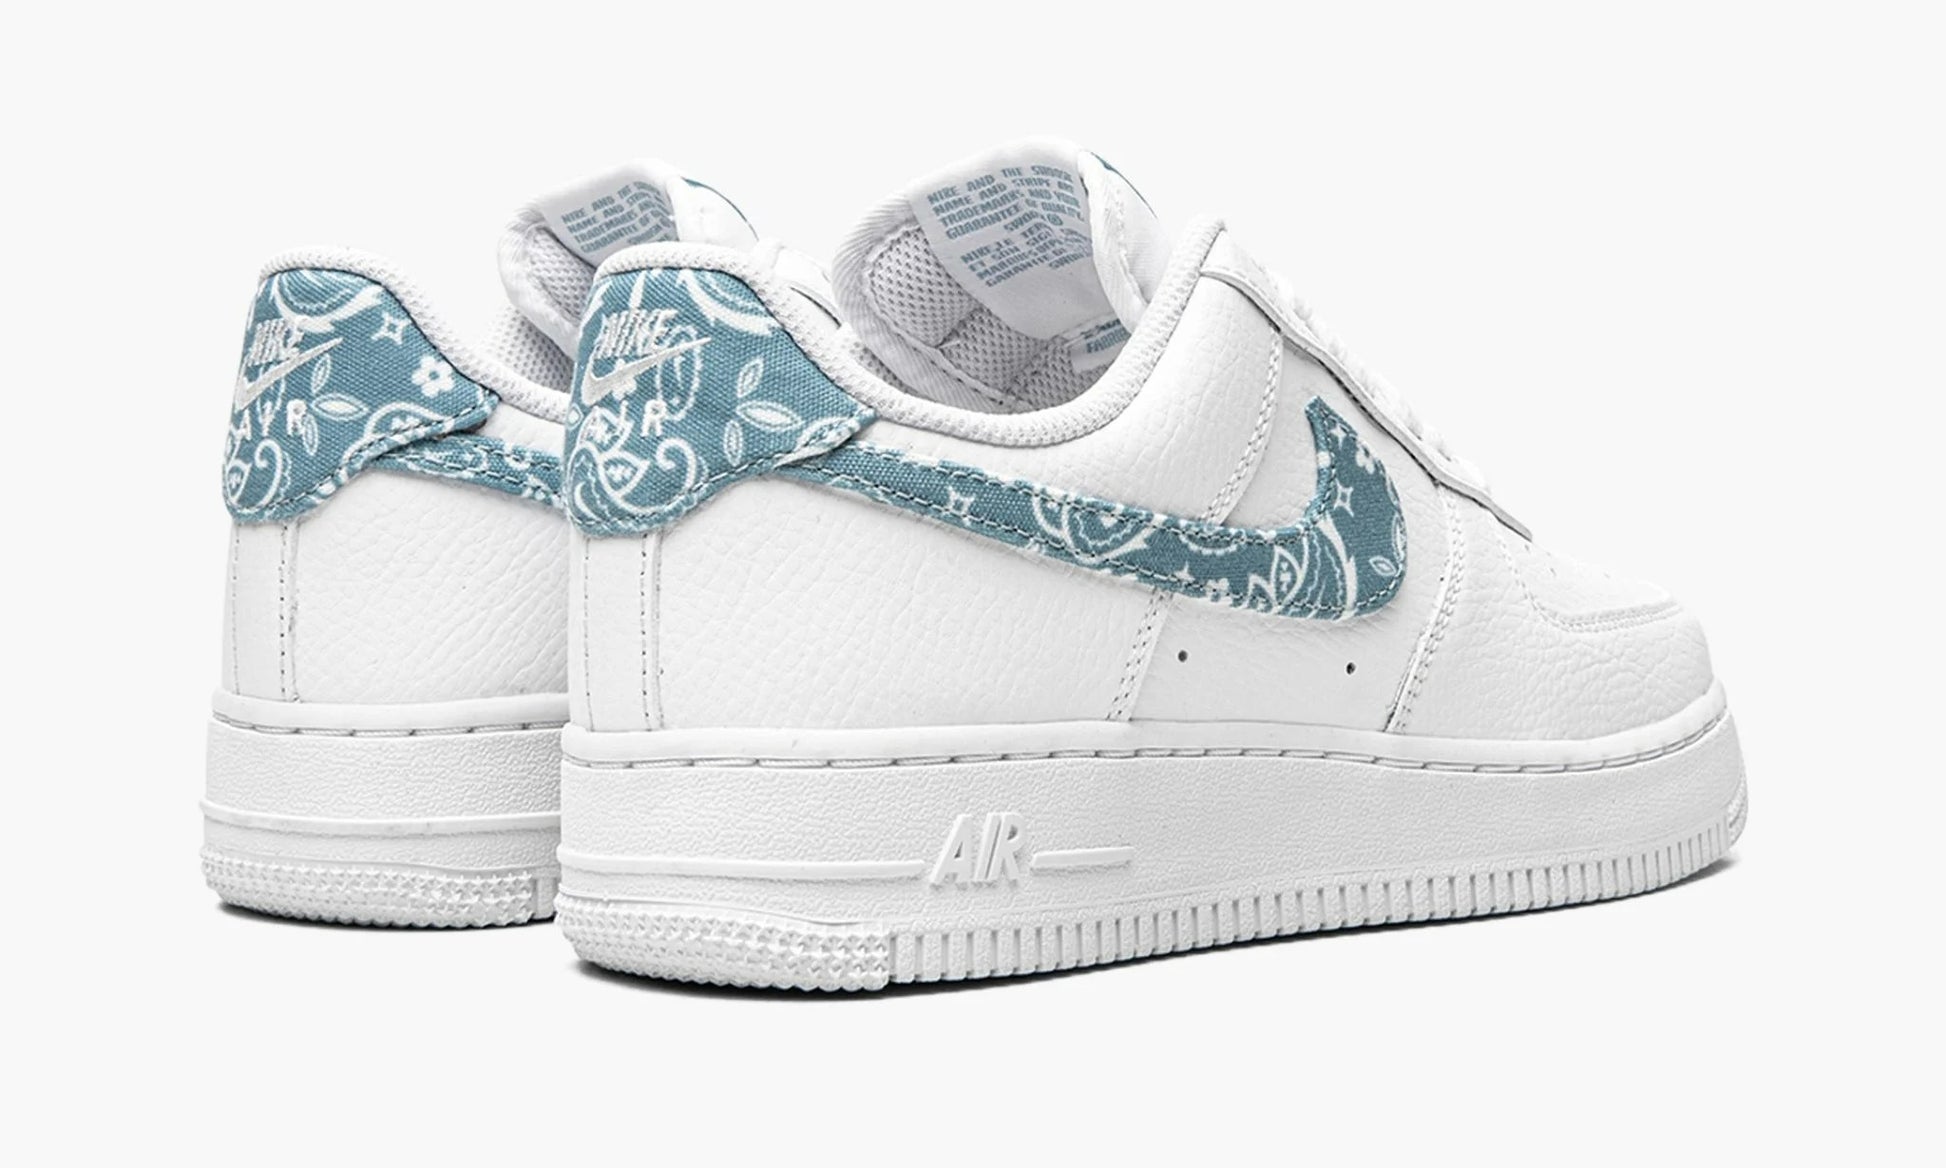 Air Force 1 Low '07 Essential WMNS Worn Blue Paisley - DH4406 100